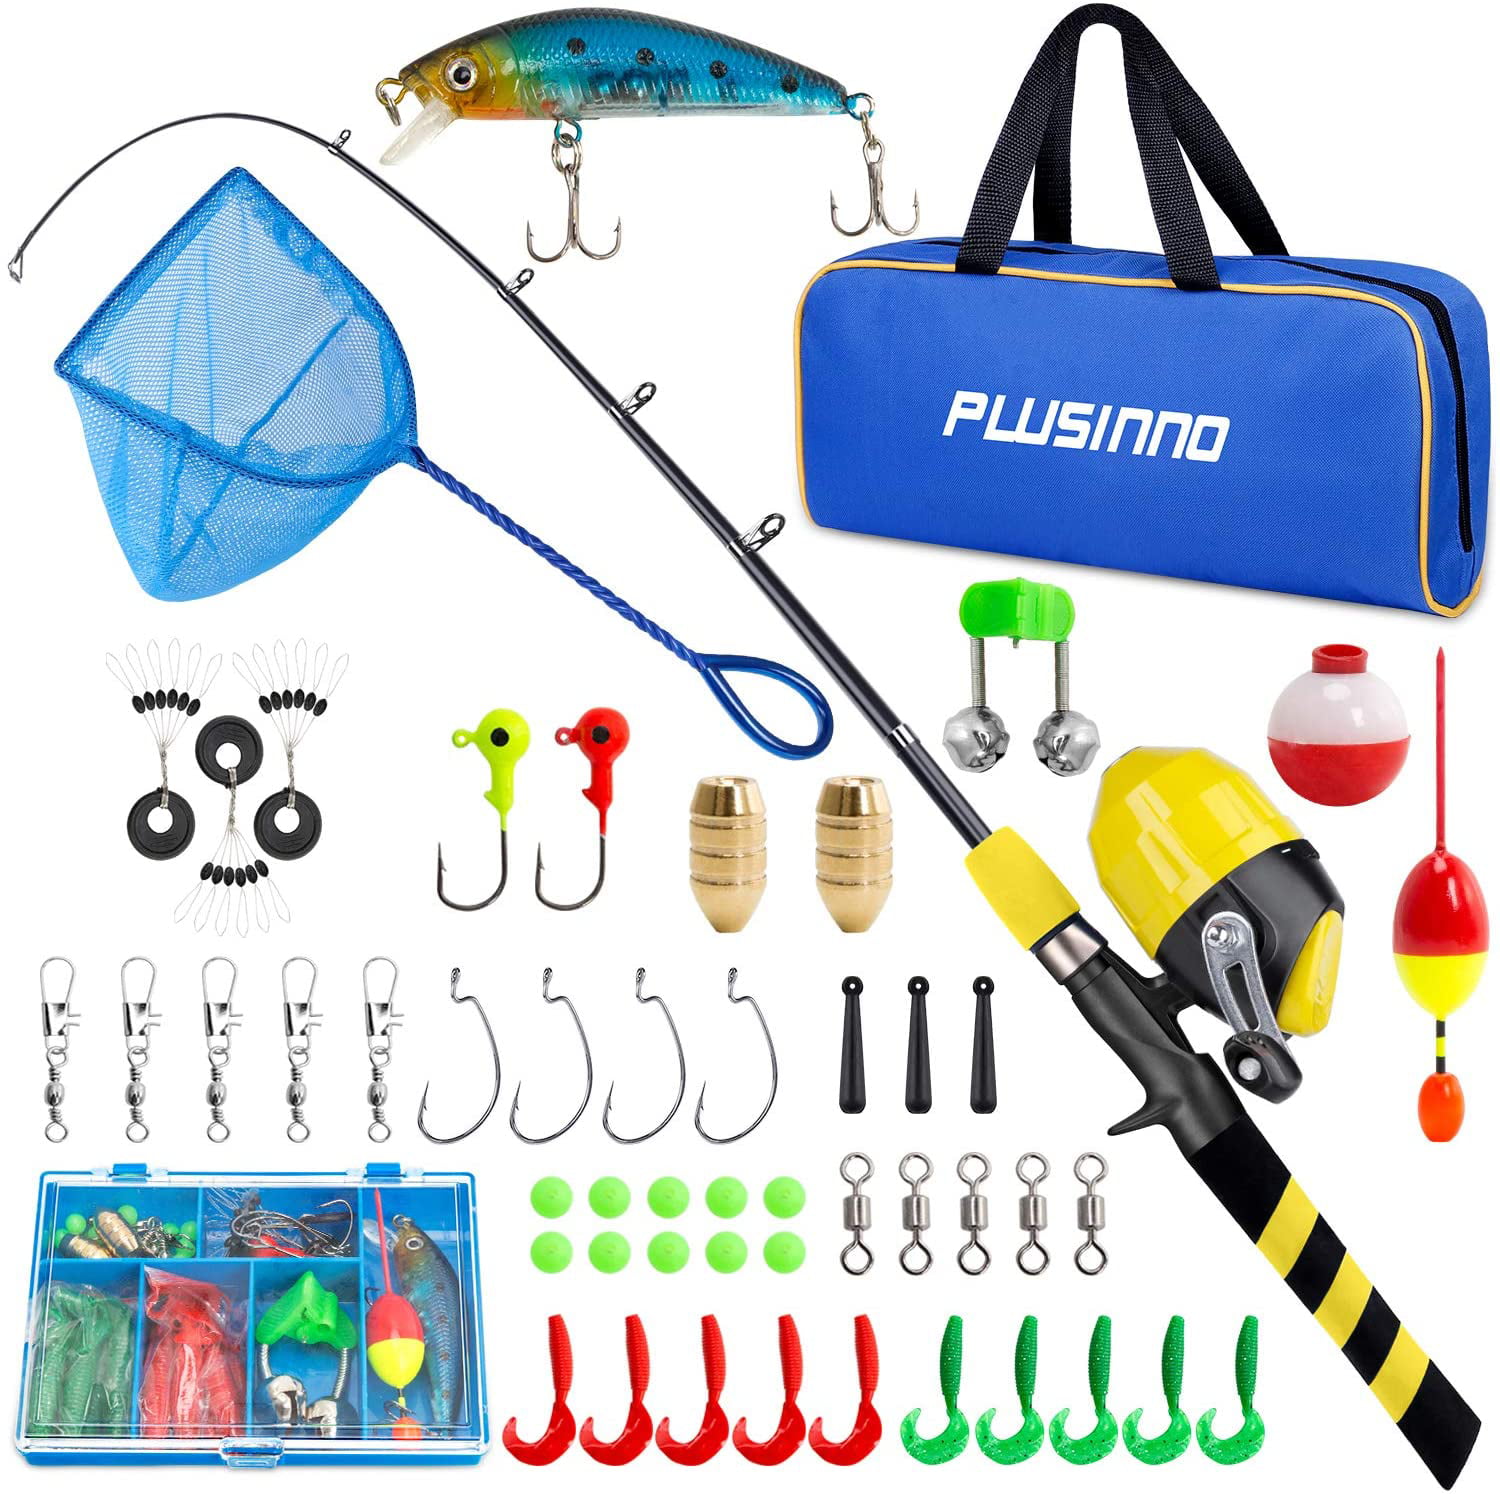 PLUSINNO Kids Fishing Pole,Telescopic Fishing Rod and Reel Combos with Spincast Fishing Reel and String with Fishing Line 